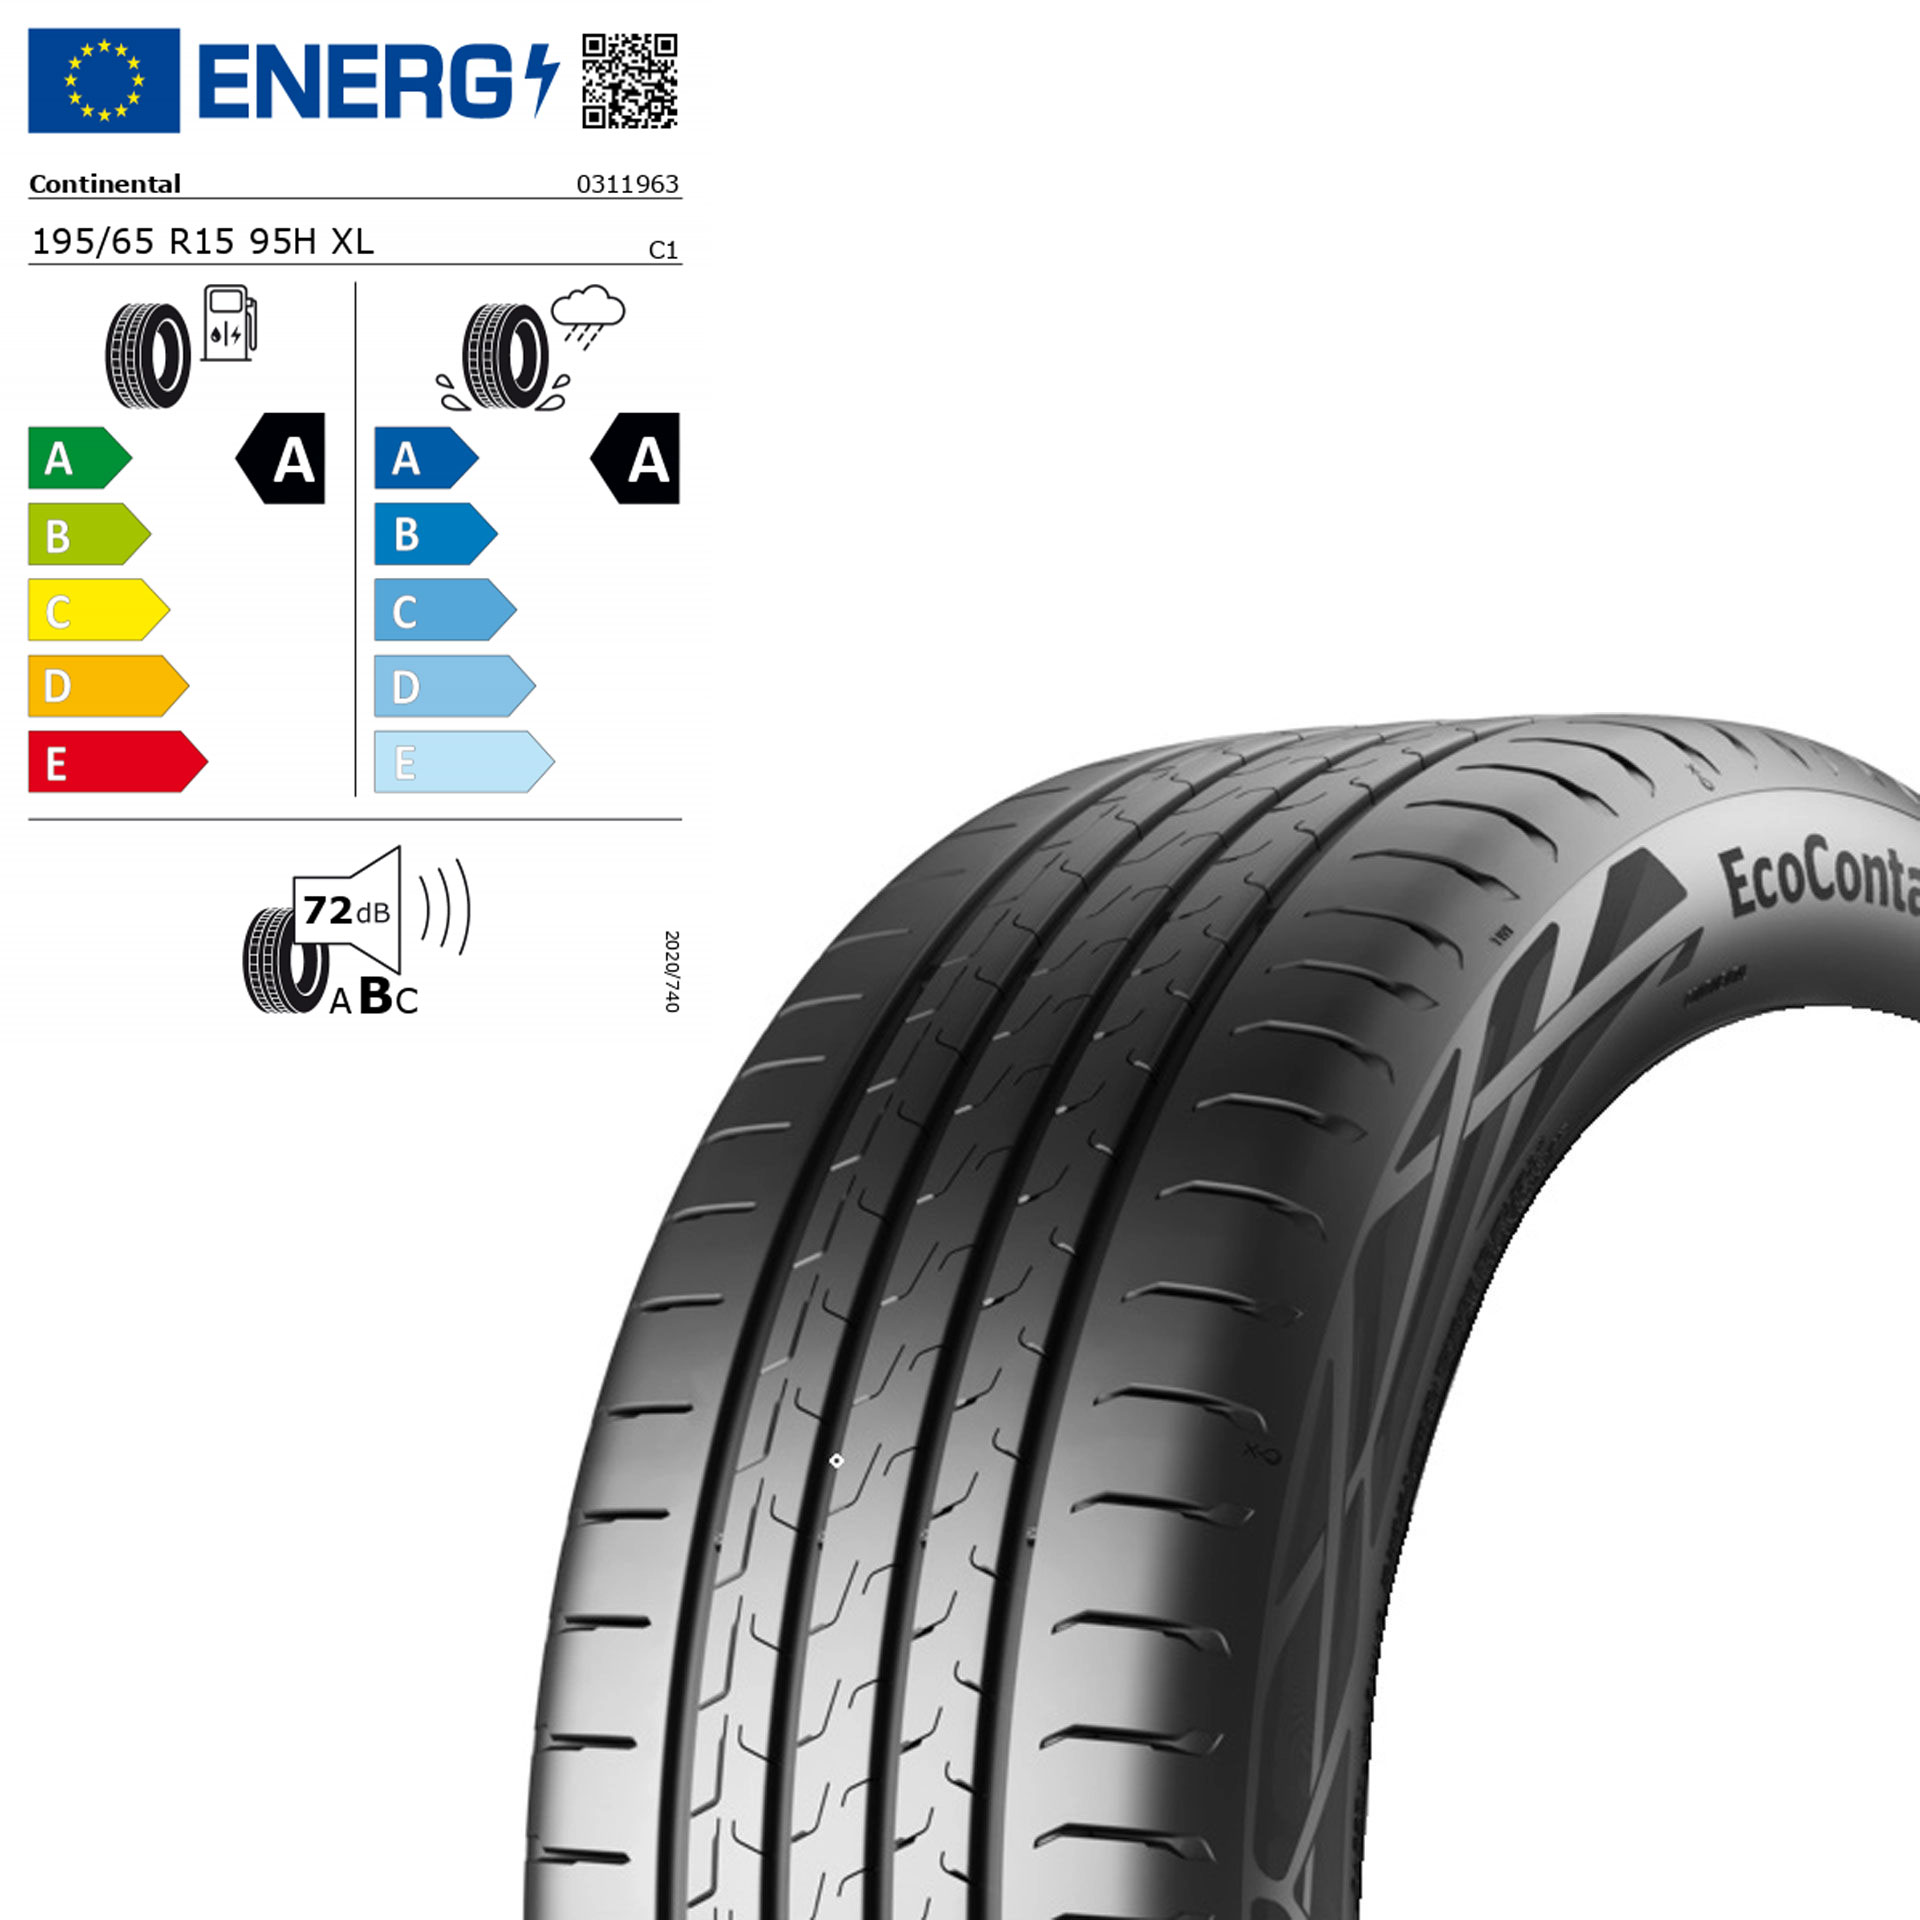 195/65 R15 95H XL Continental EcoContact 6 Sommerreifen Q44004110033A